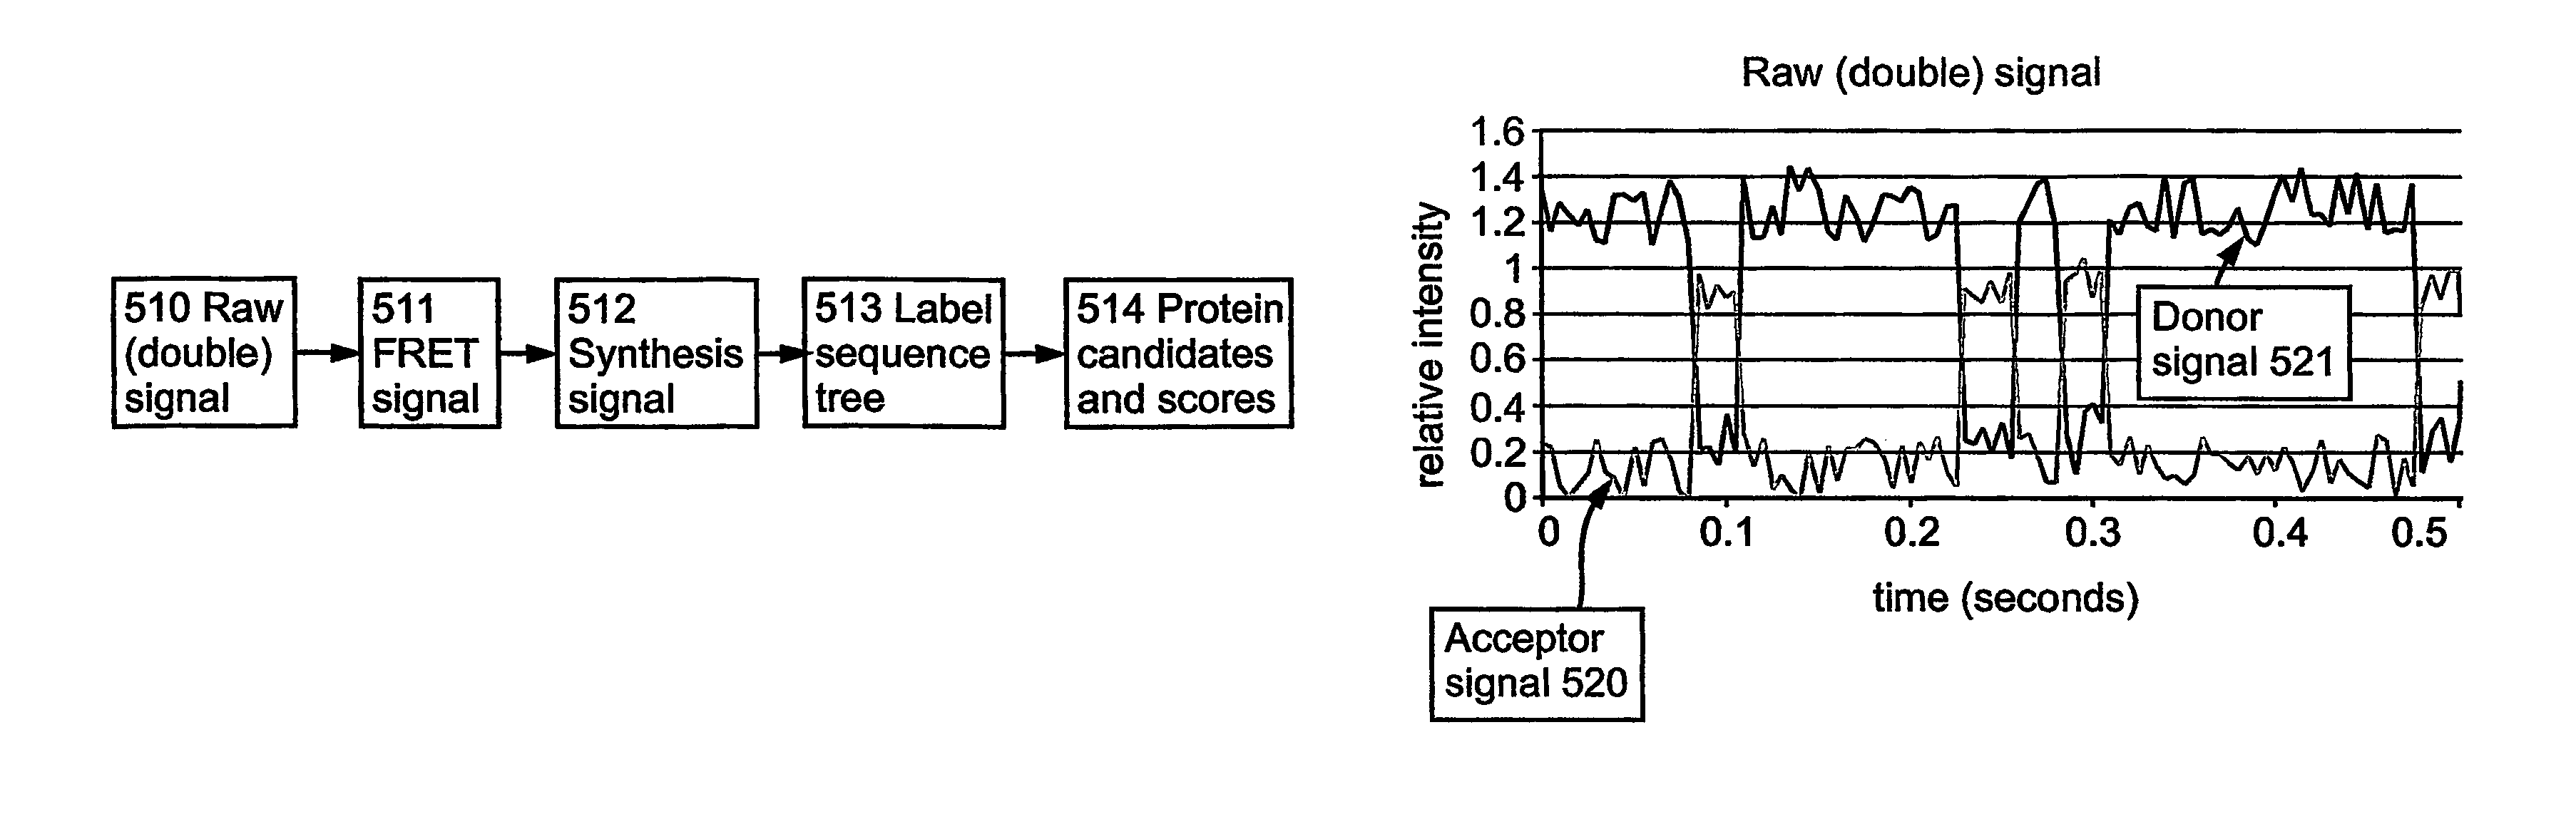 Protein synthesis monitoring (PSM)